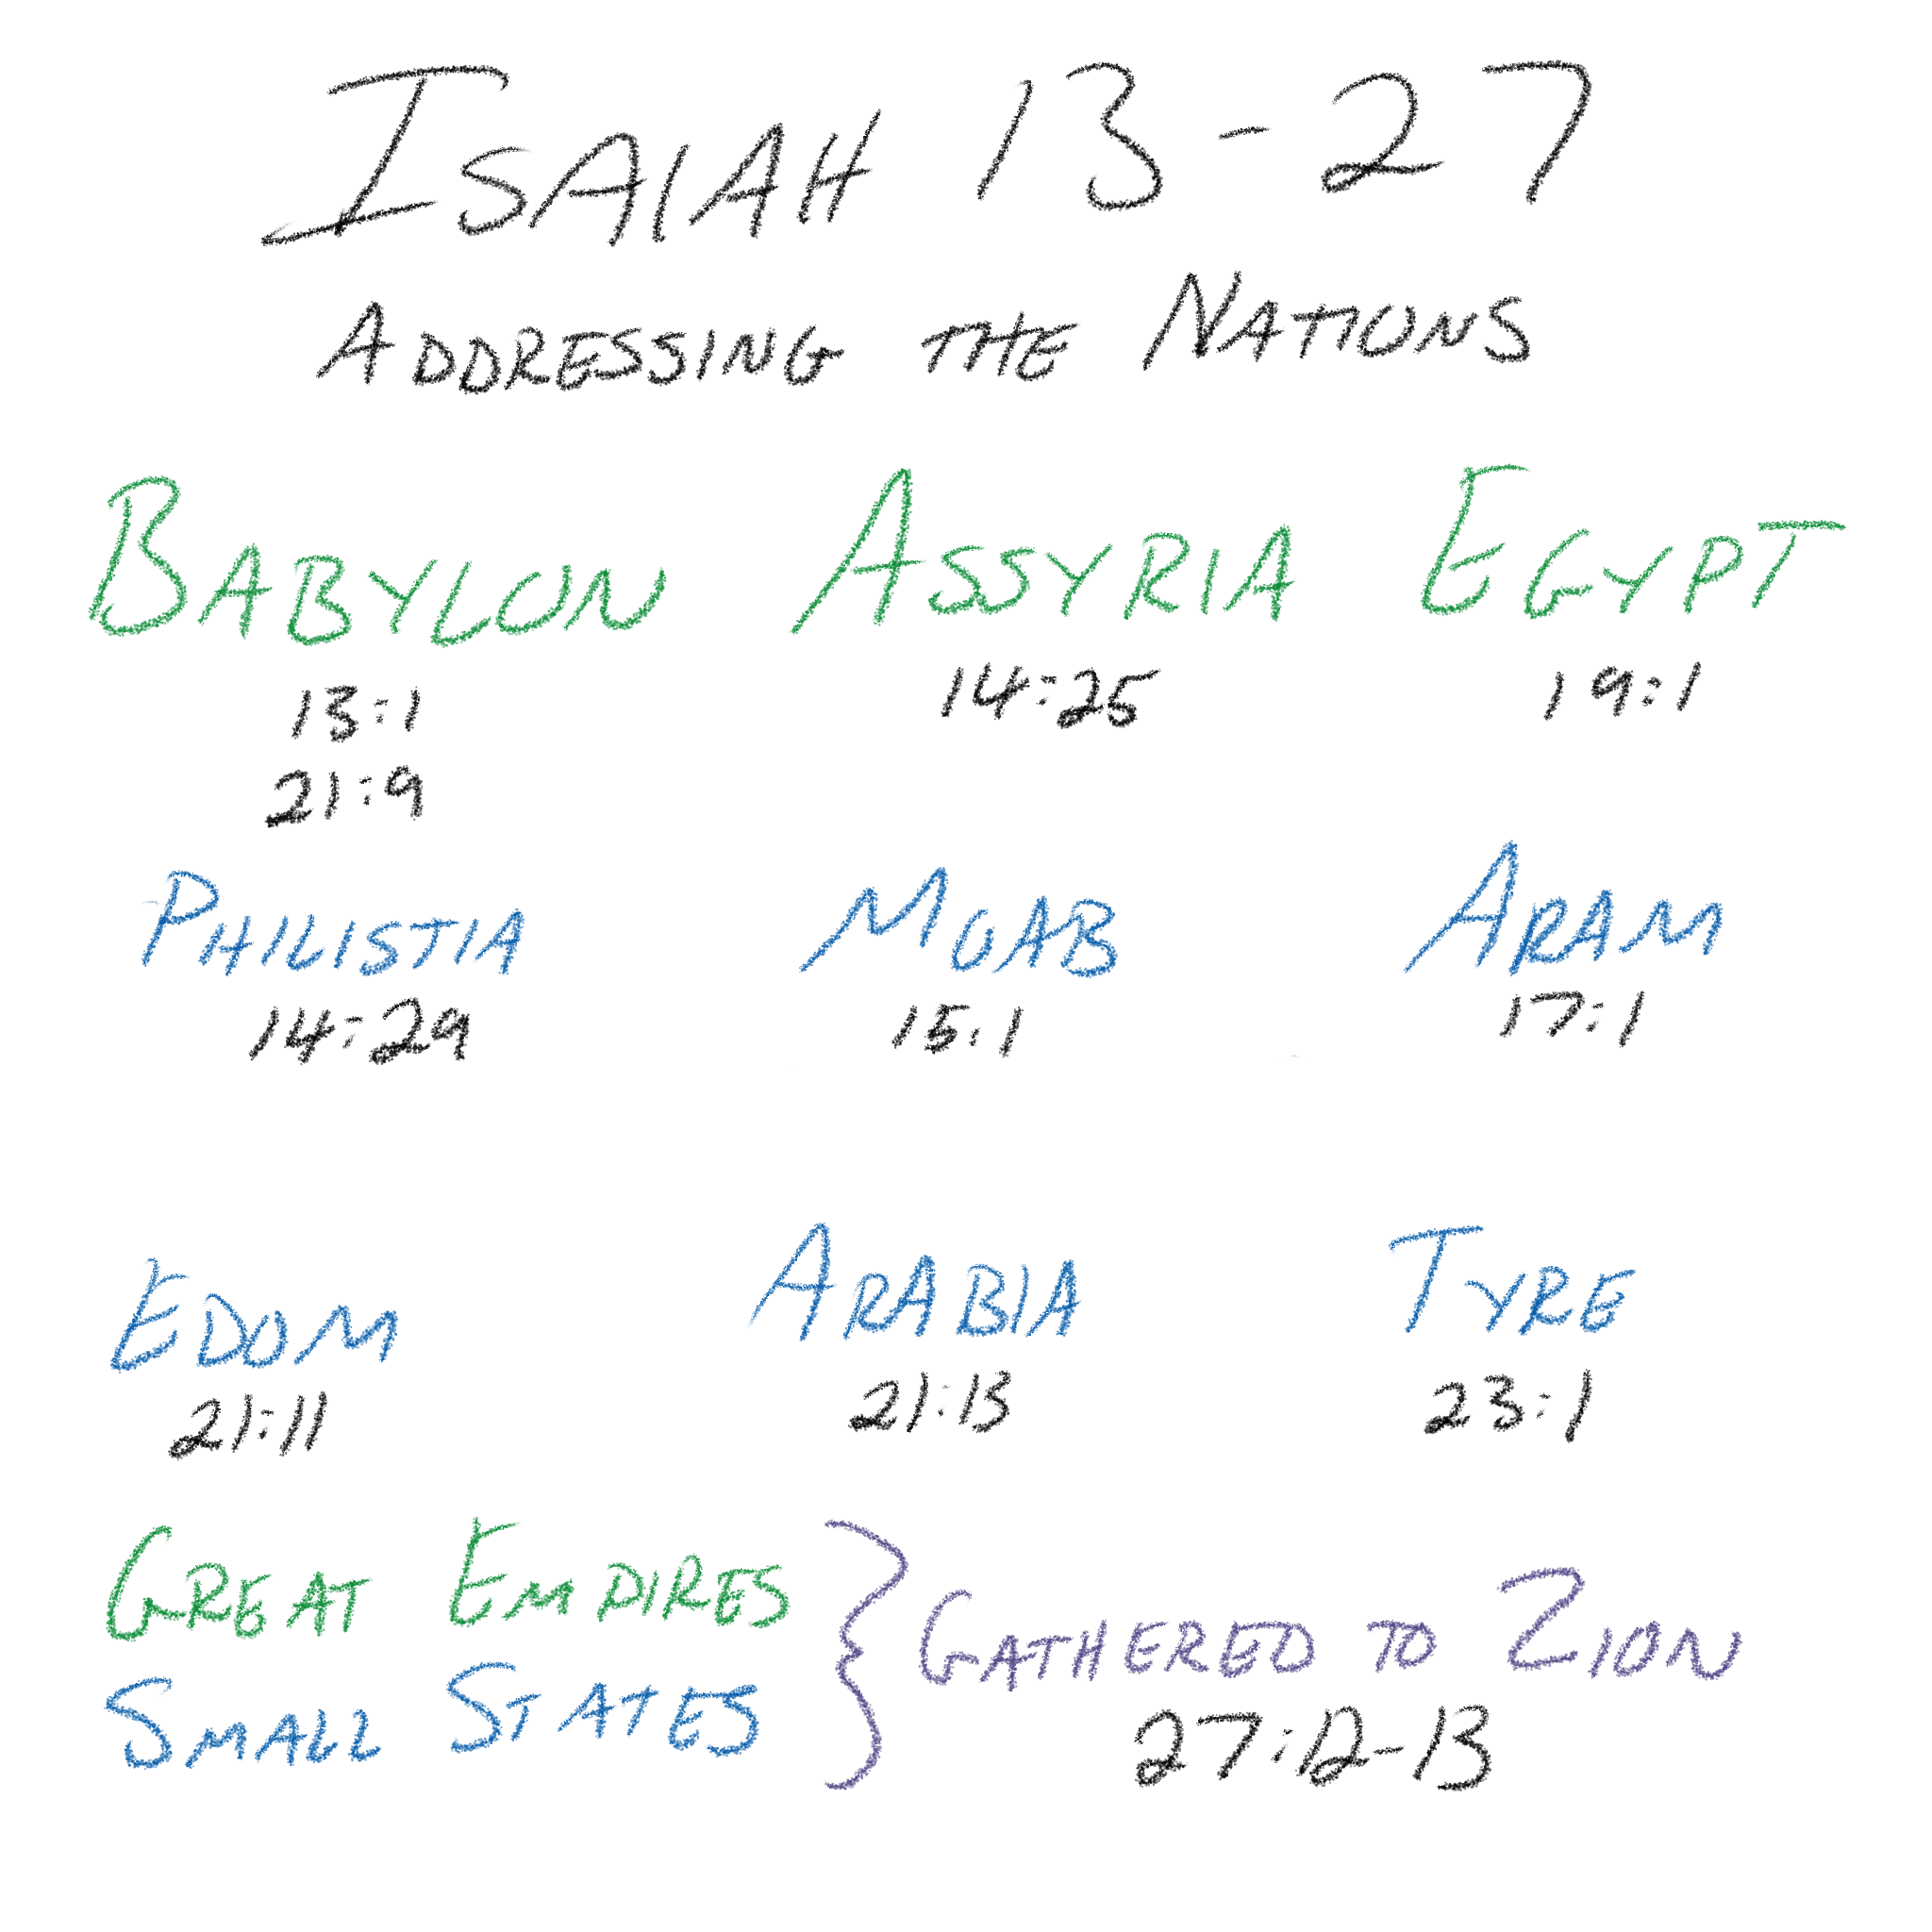 Isaiah 13–27 - Addressing the Nations